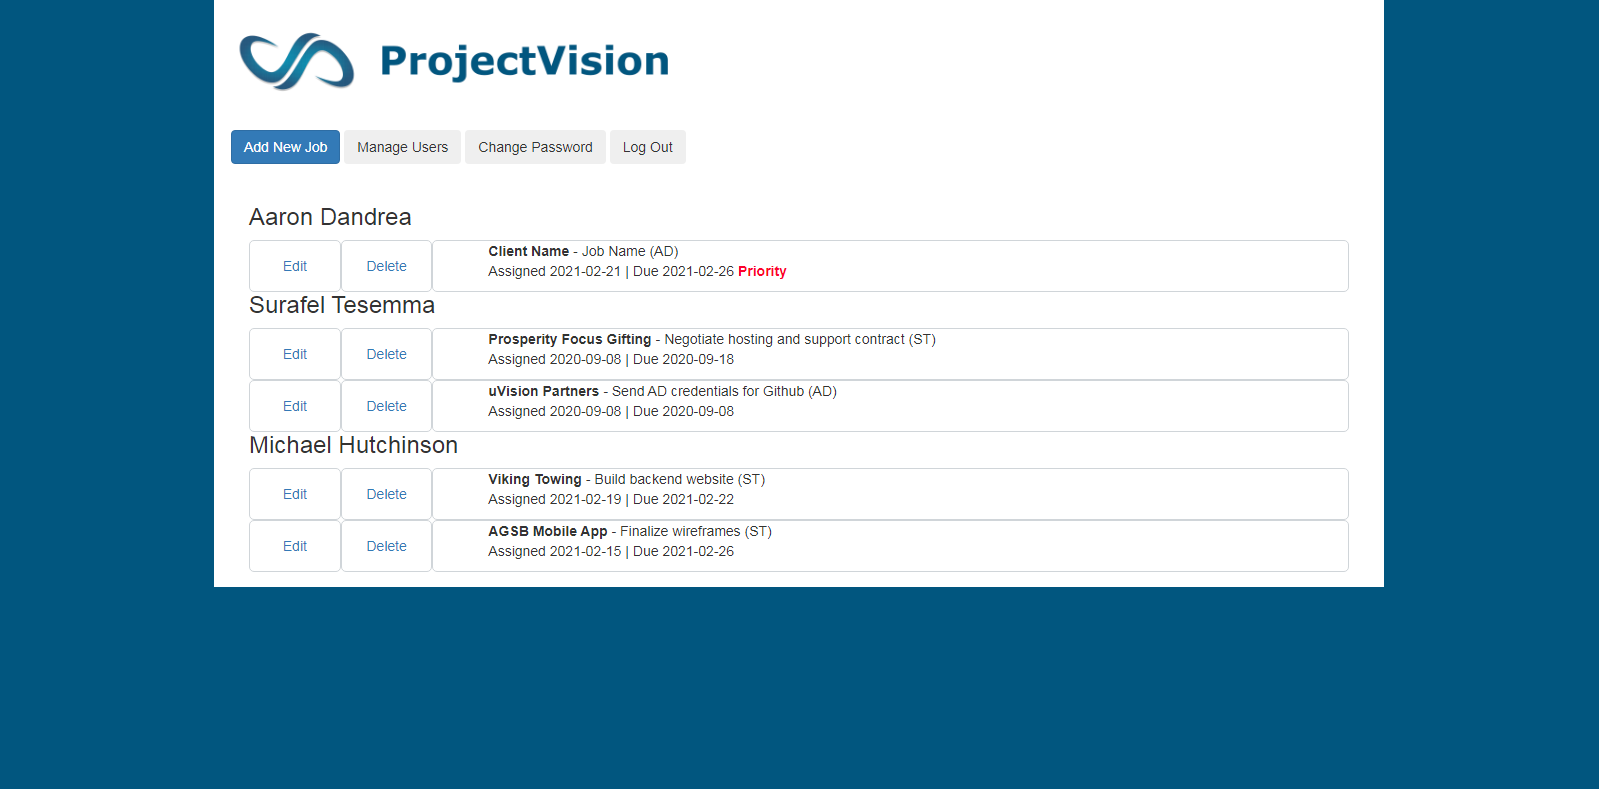 Project Vision